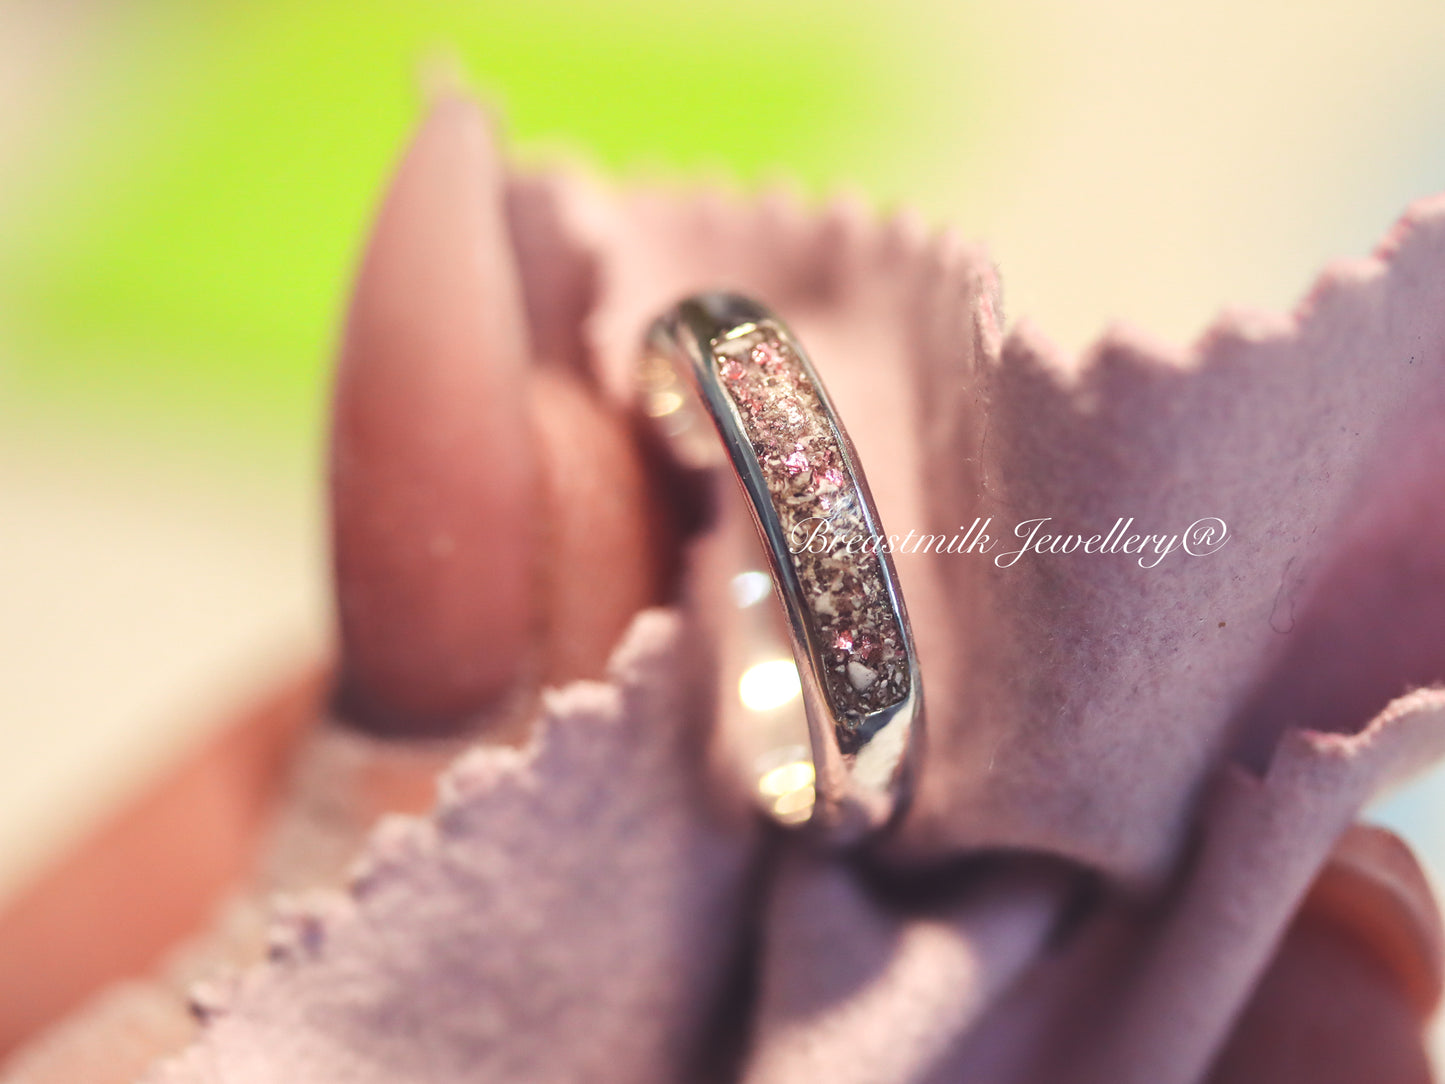 Channeled Love ring